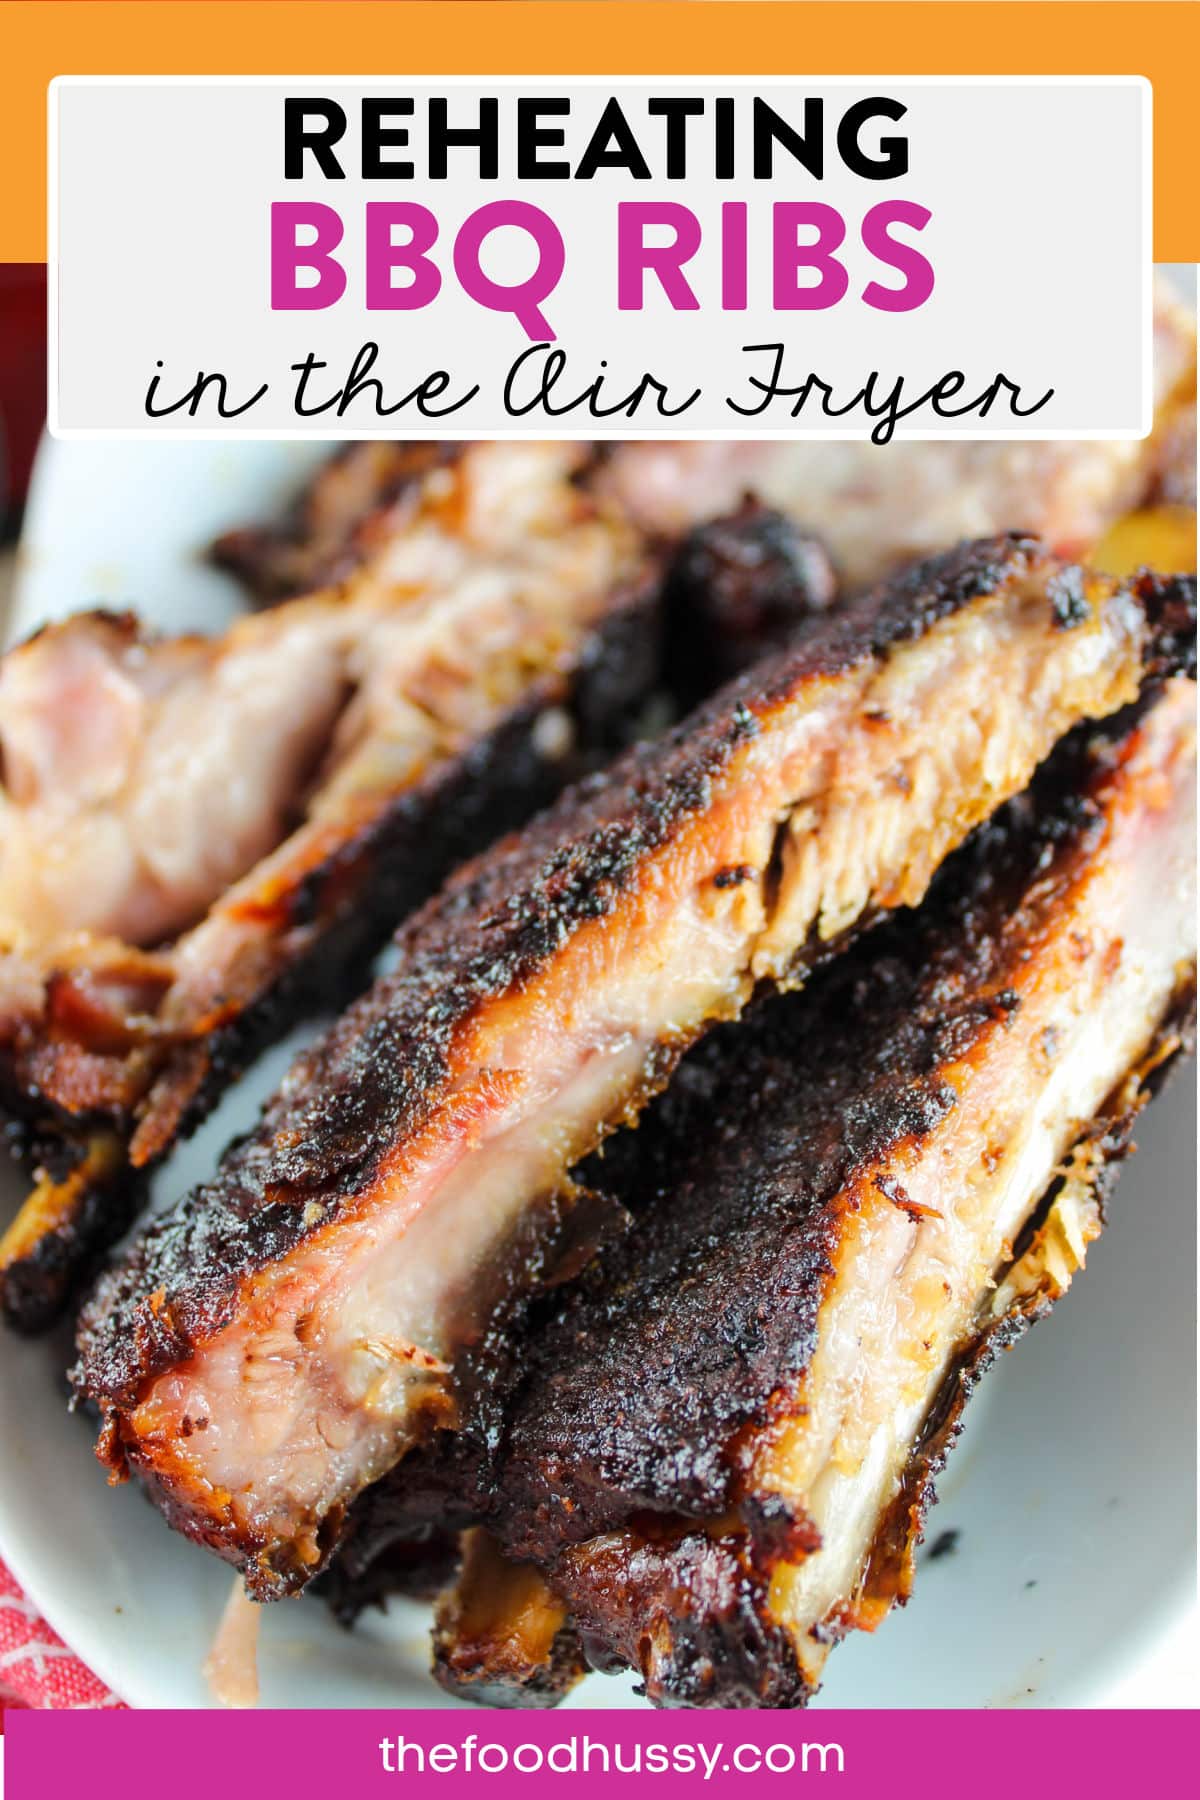 Reheating ribs in the air fryer is an easy way to get dinner on the table quickly! Leftover ribs can easily dry out but the air fryer helps the process so they have all the flavor the second time around.
 via @foodhussy